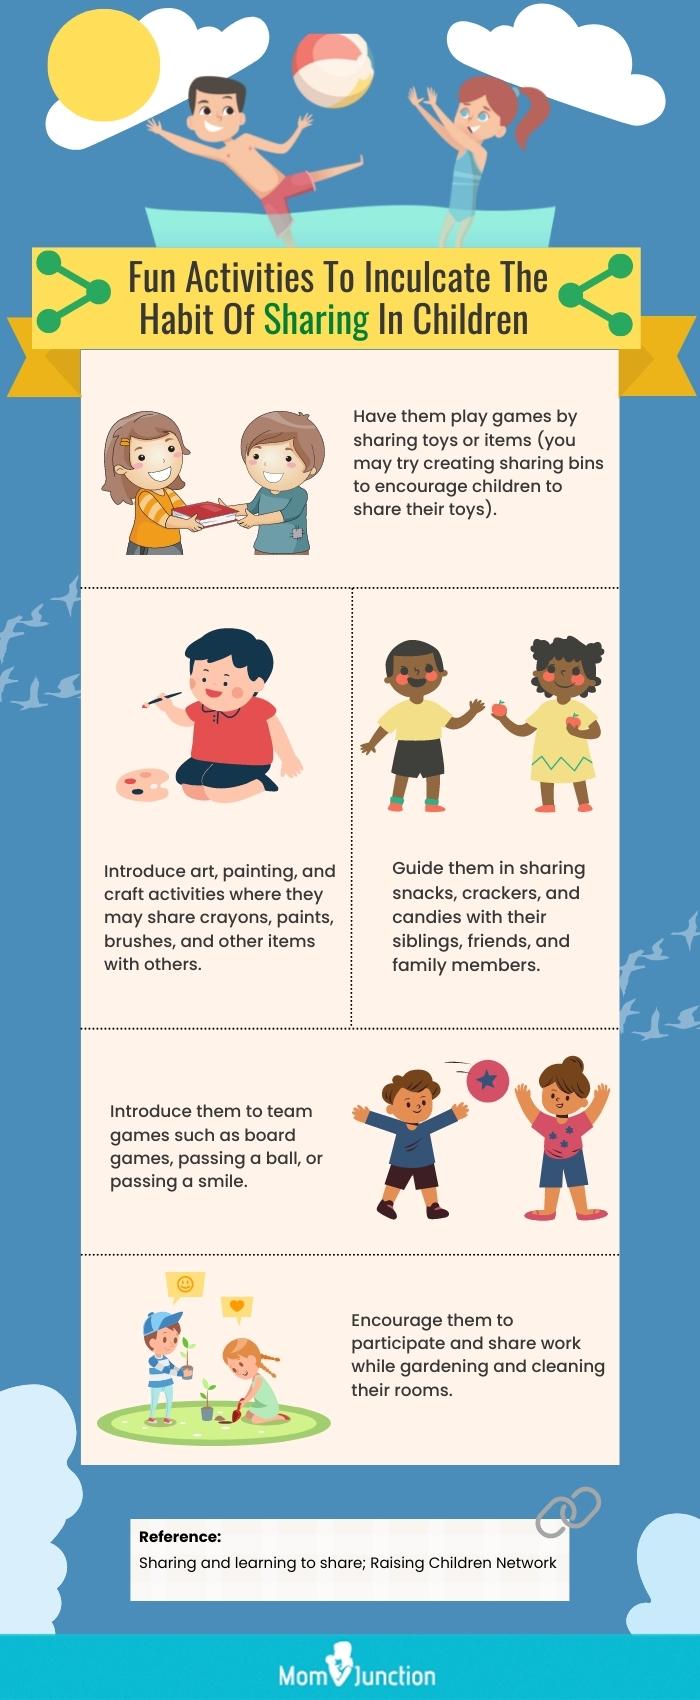 fun activities to inculcate the habit of sharing in children (infographic)